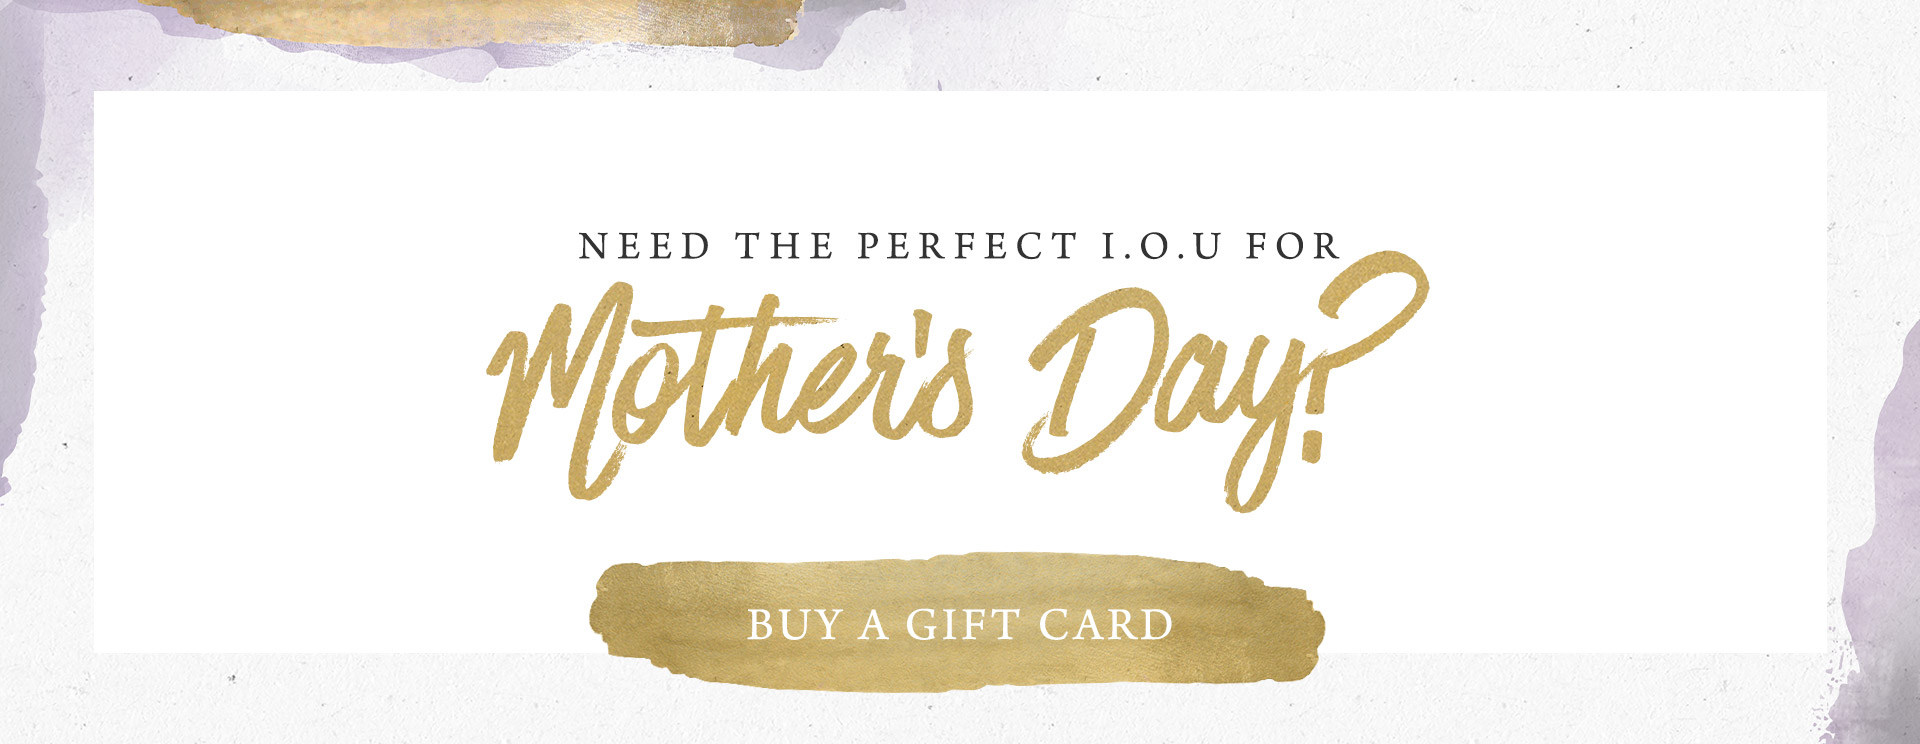 Mother's Day 2019 at The Langton